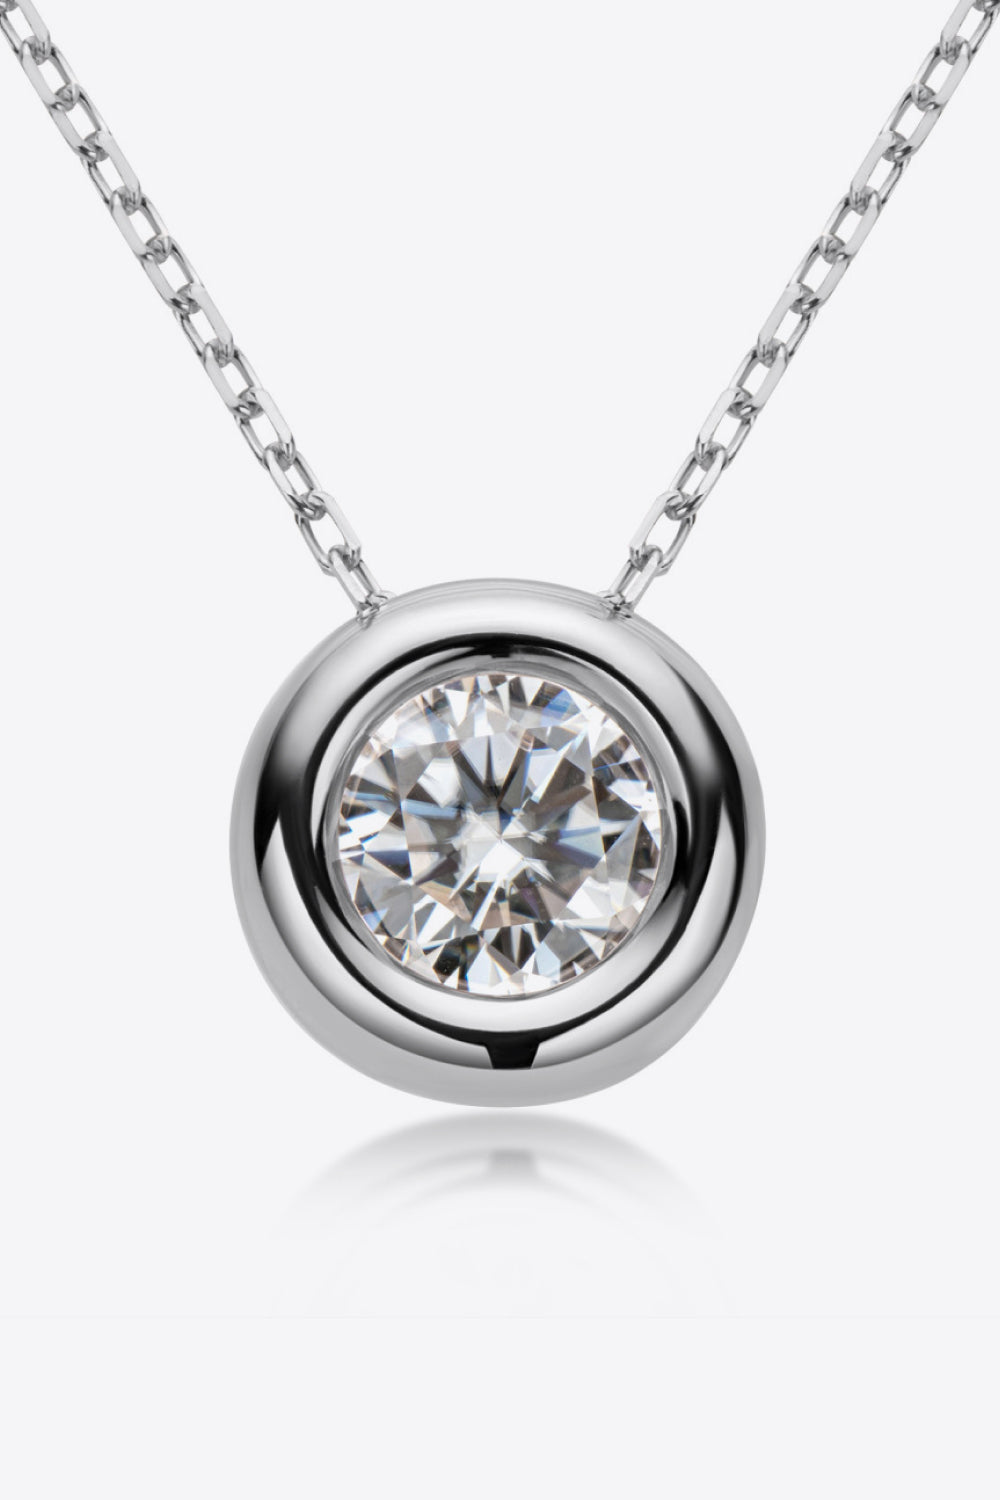 1 Carat Moissanite Pendant 925 Sterling Silver Necklace - Necklaces - FITGGINS